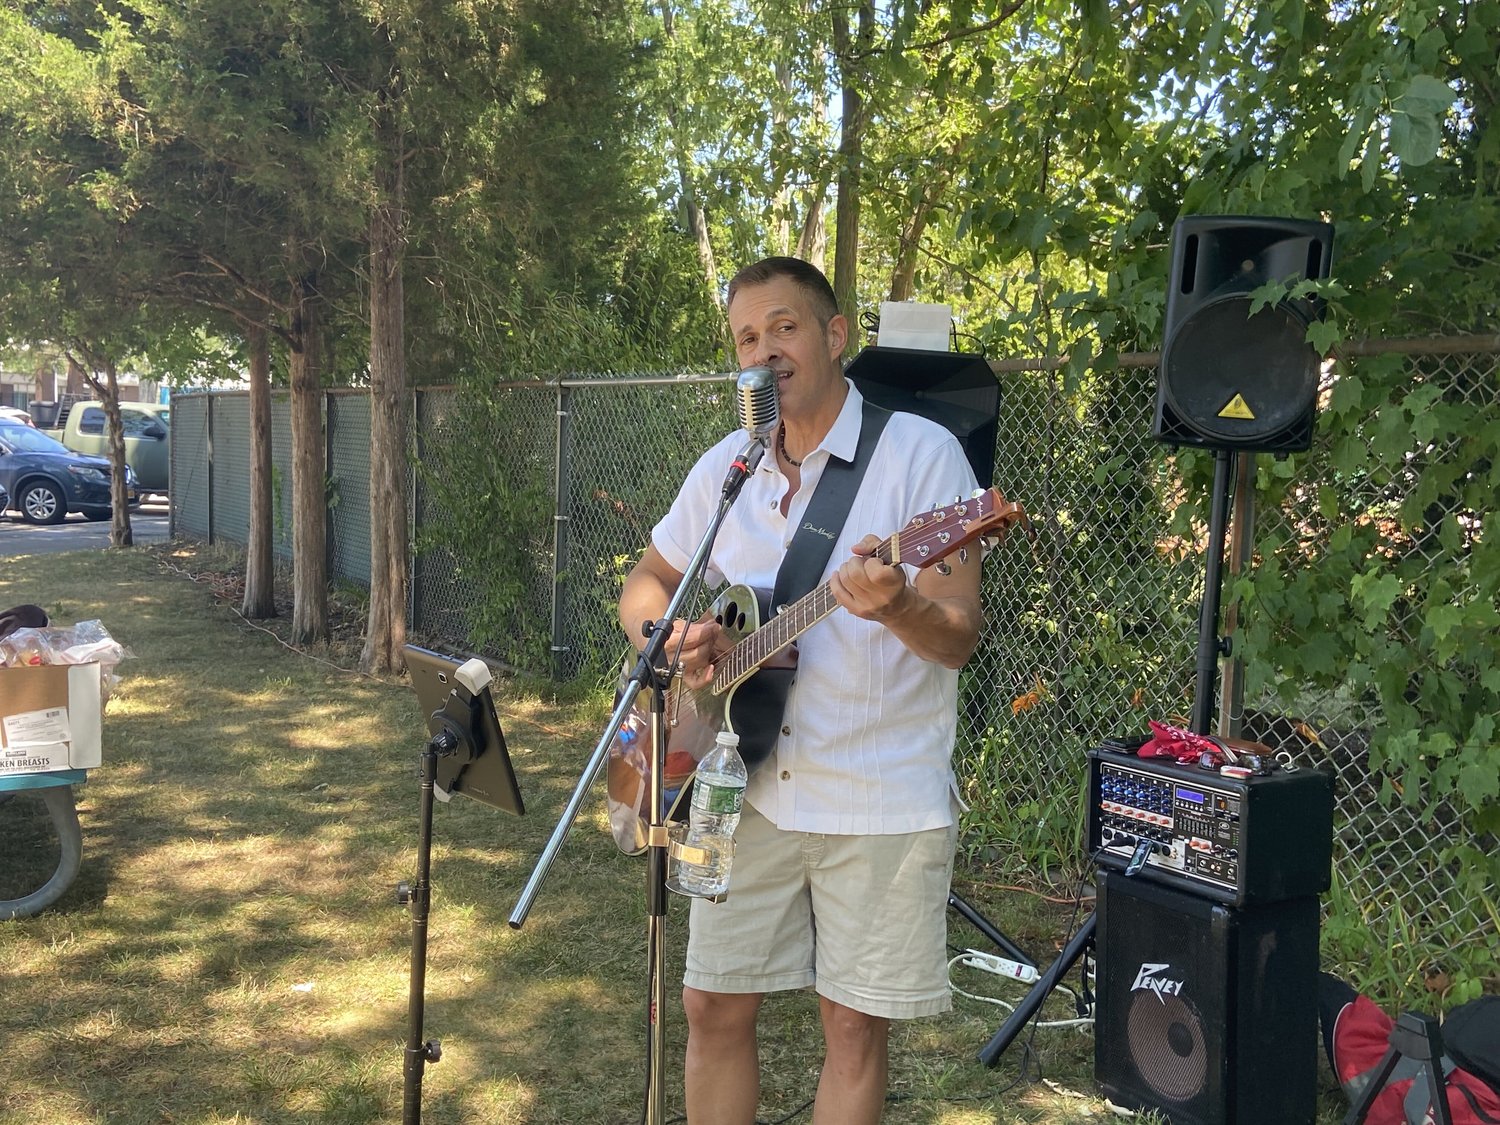 James Castelli delighted the picnic crowd with some singing and guitar playing.